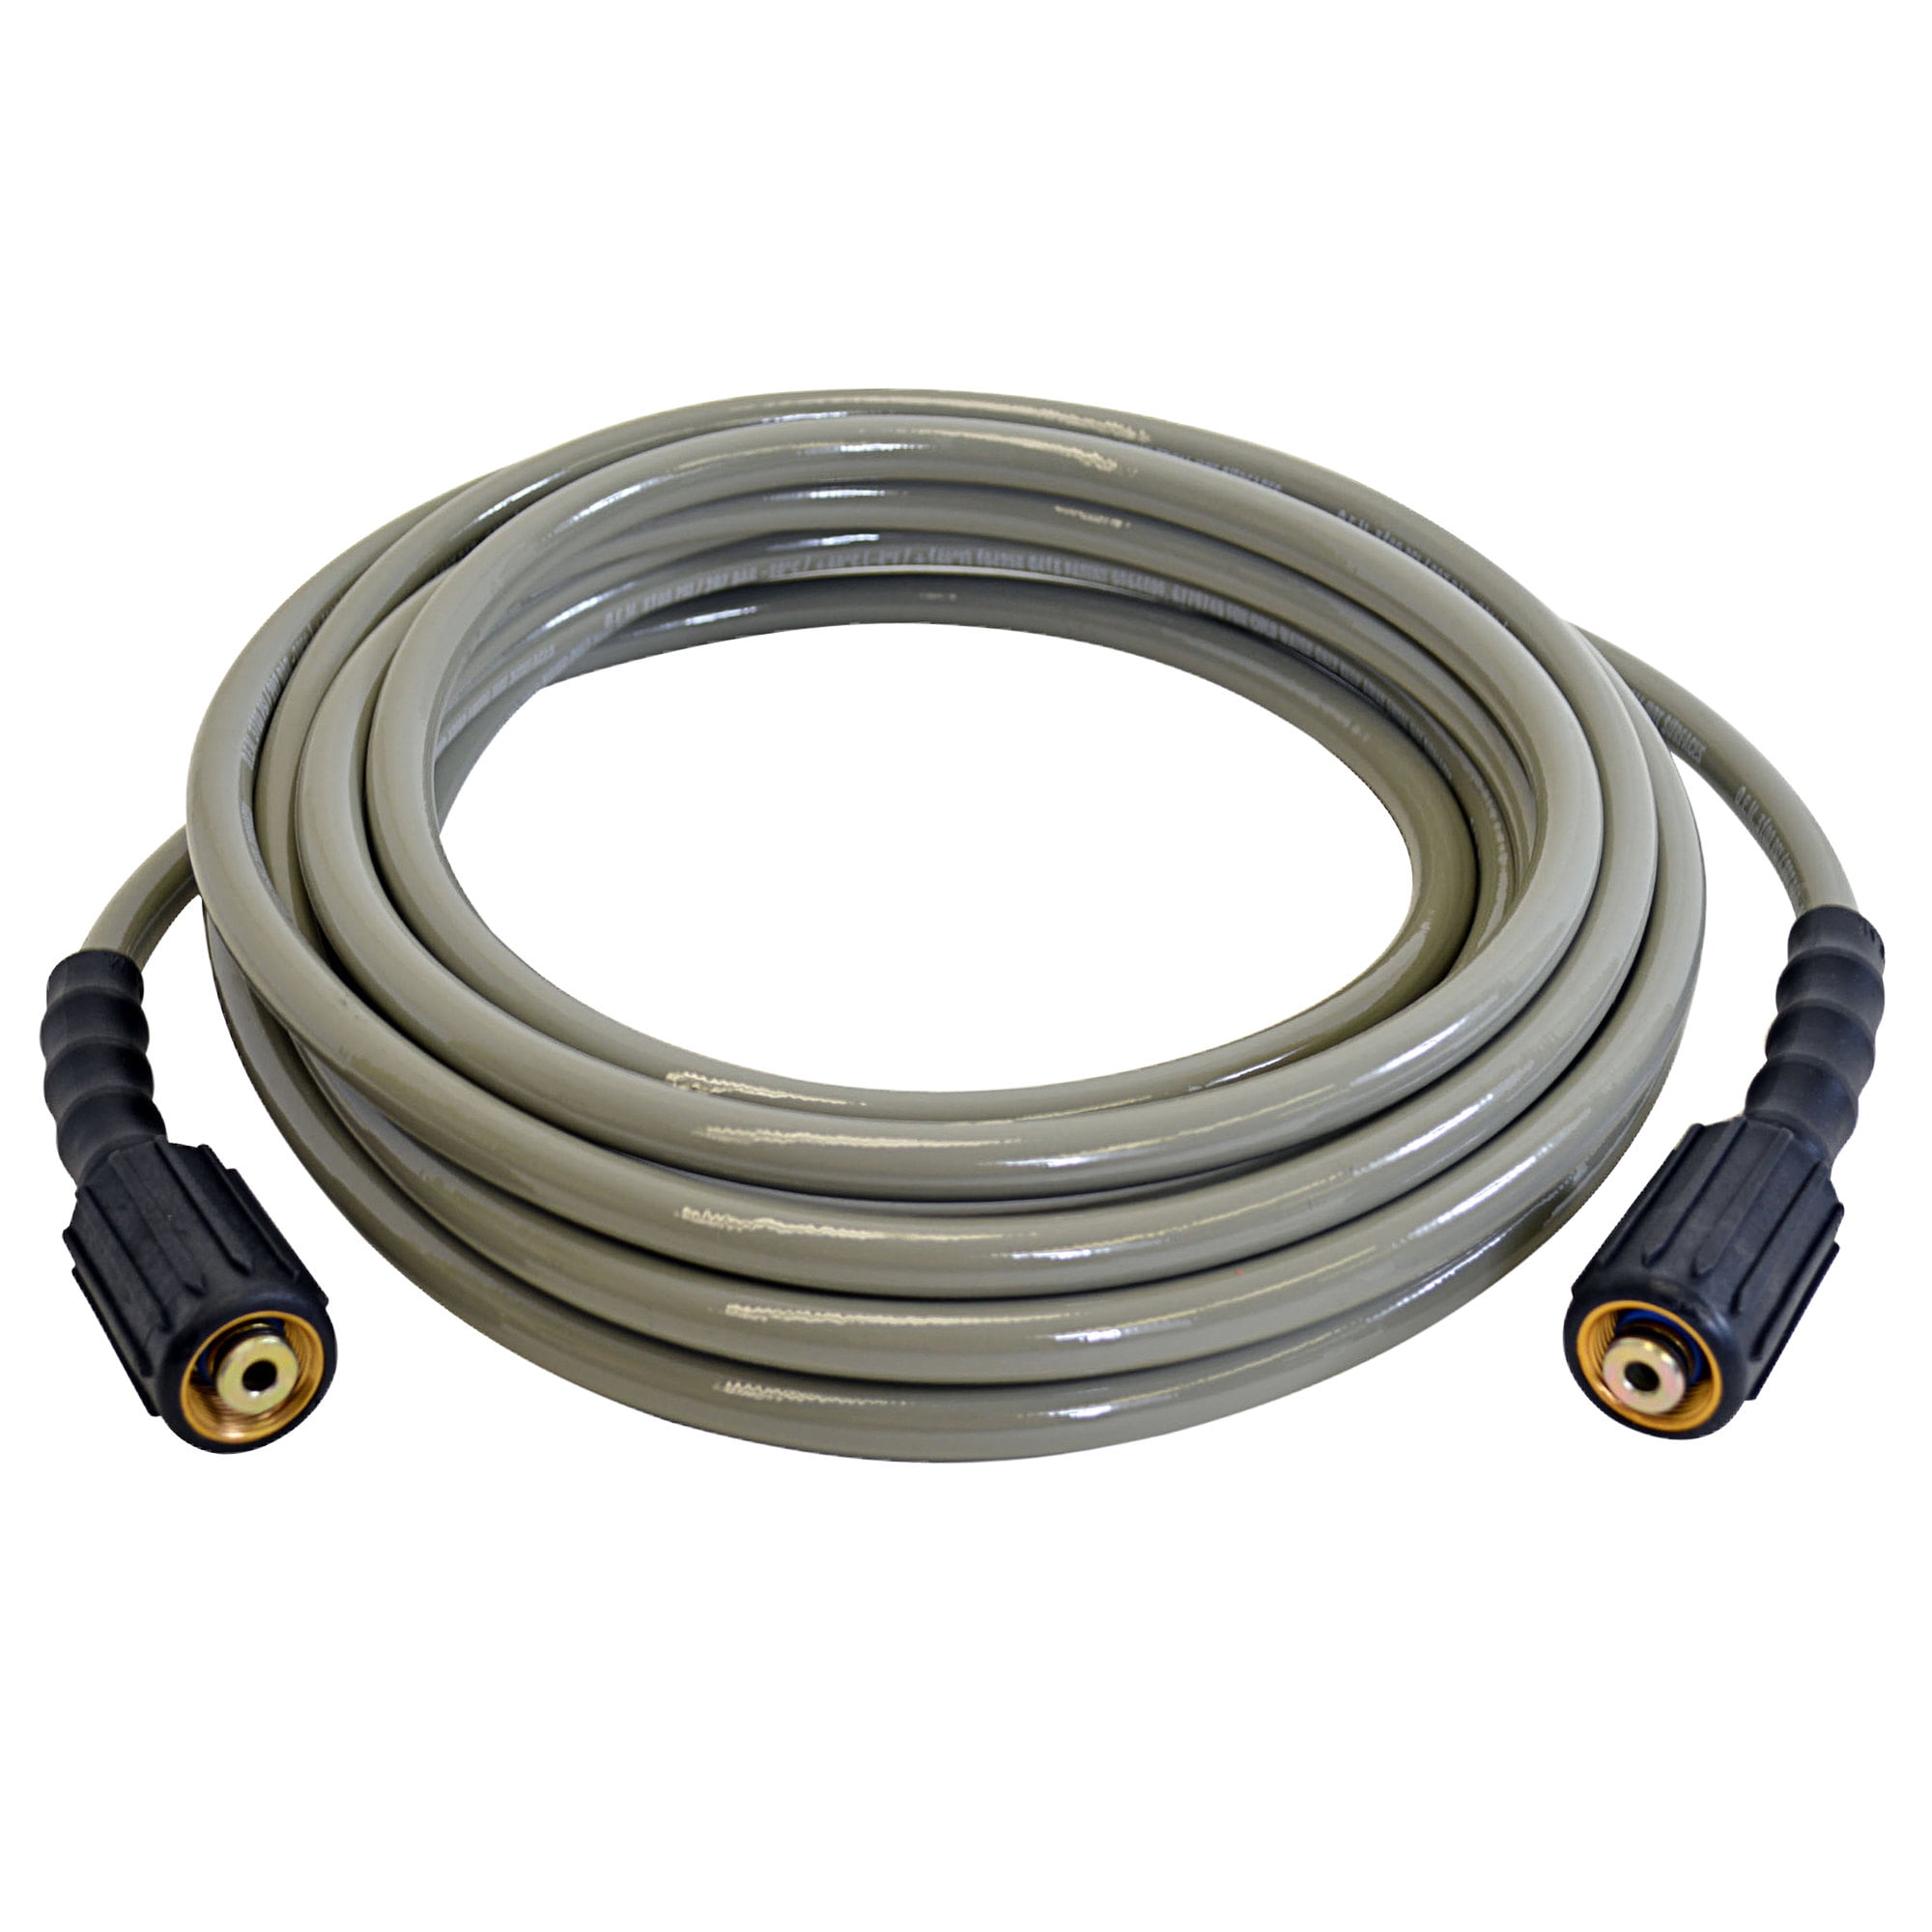 30 Metre Karcher HDS 6/12 C Type Pressure Washer Replacement Hose Thirty 30M M 